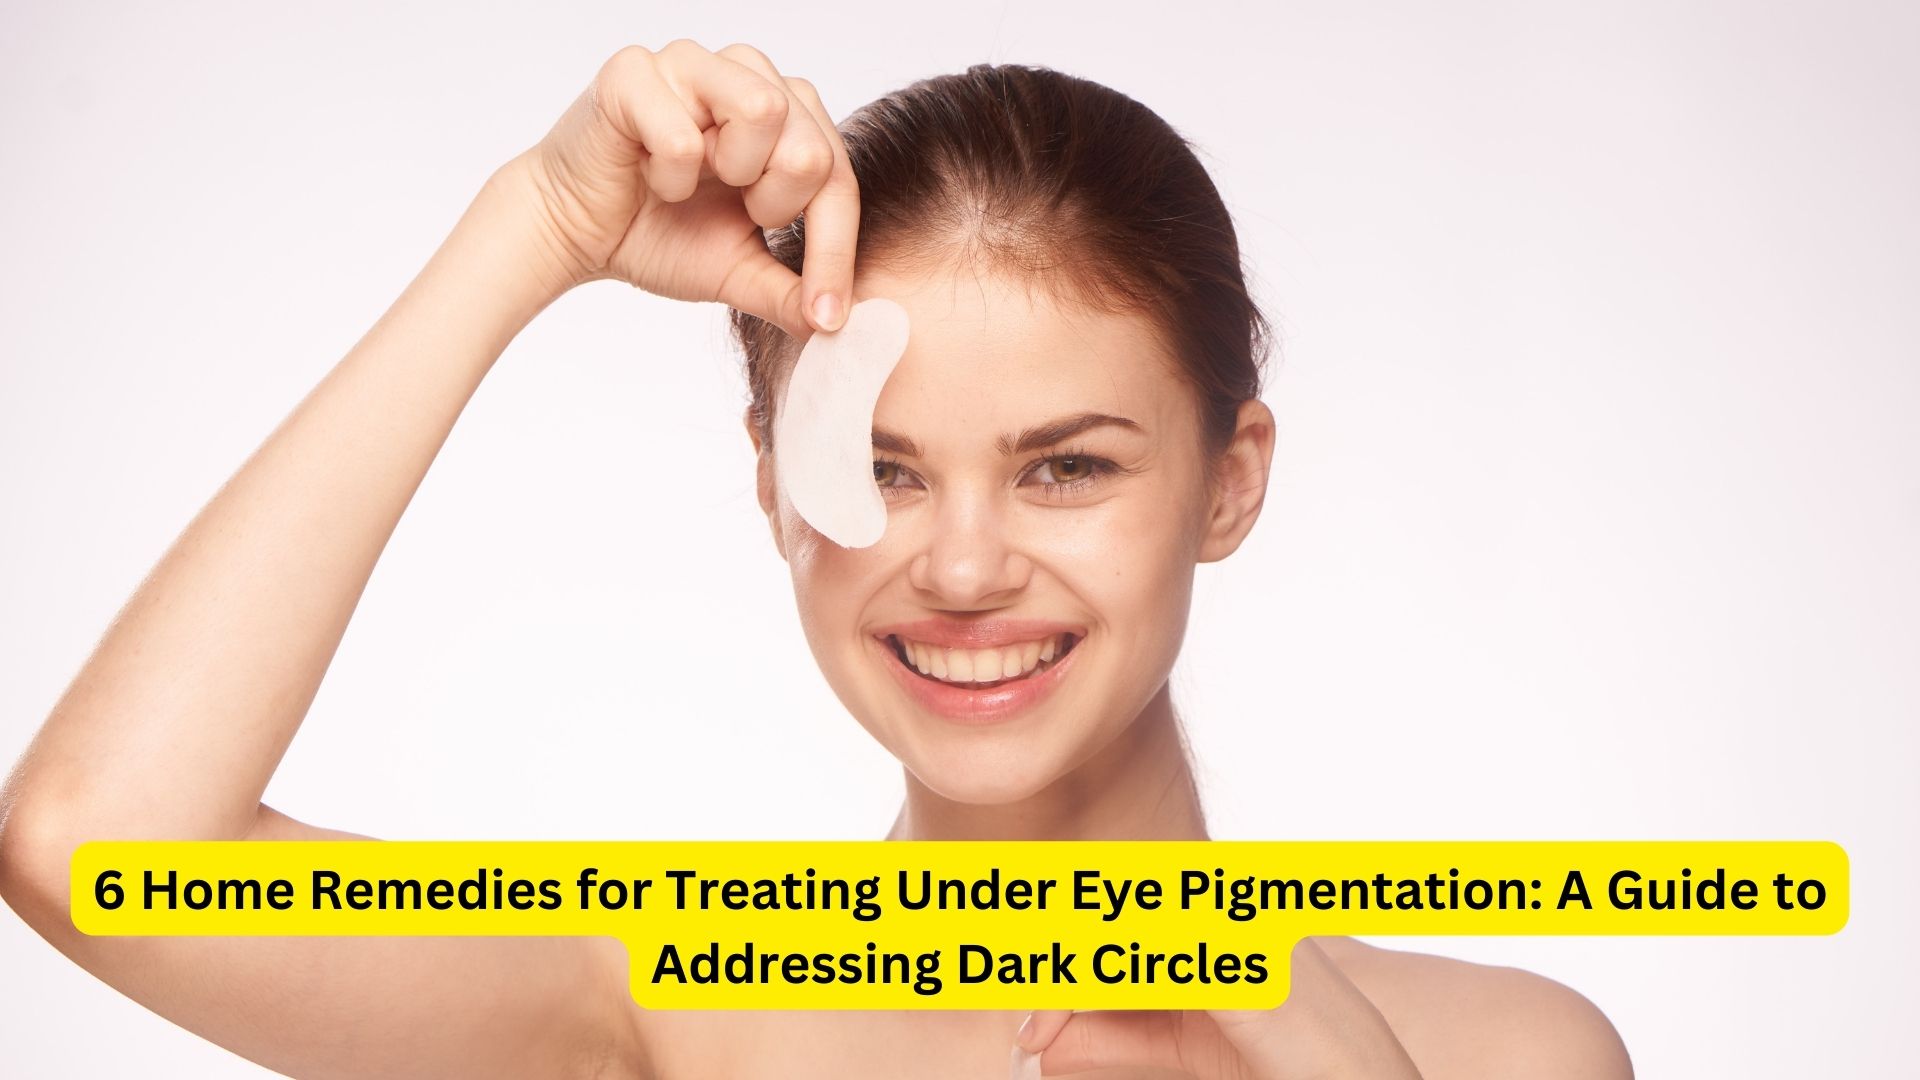 6 Home Remedies for Treating Under Eye Pigmentation: A Guide to Addressing Dark Circles